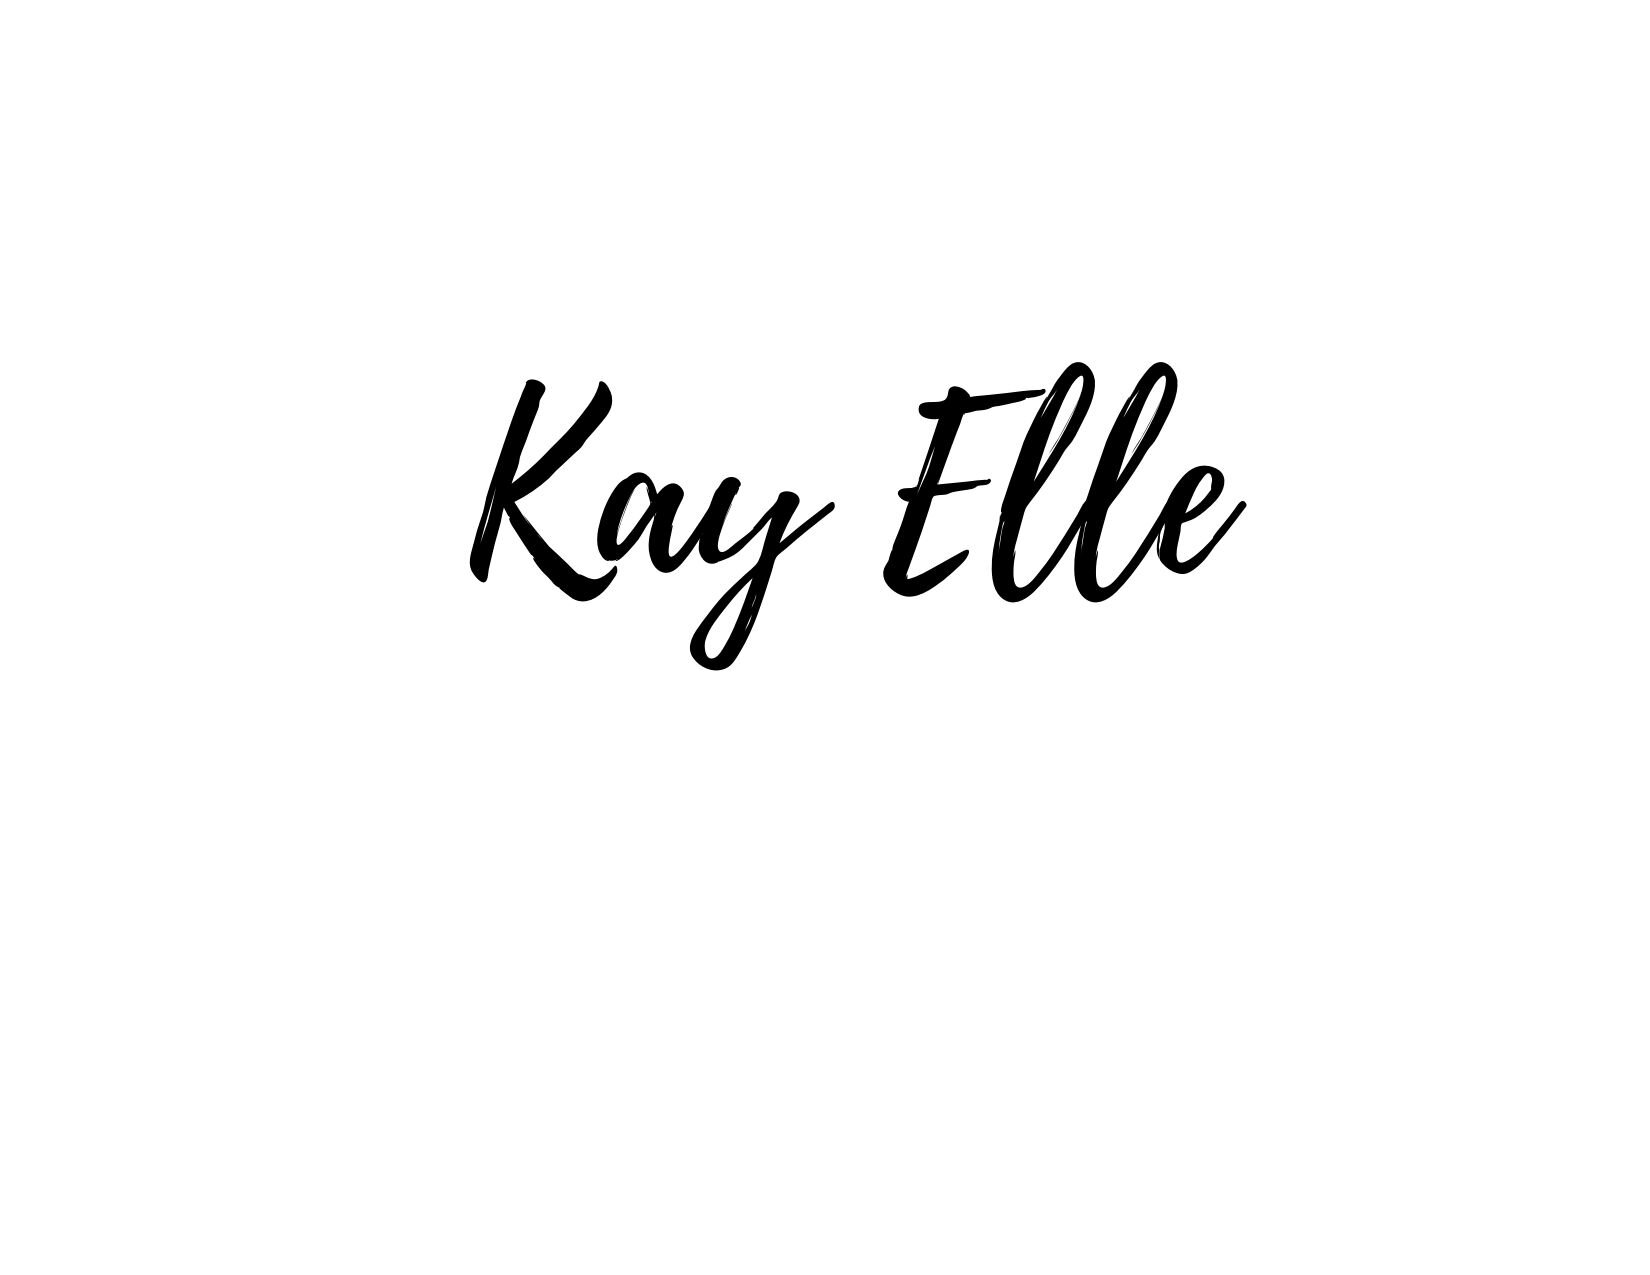 Kay and elle